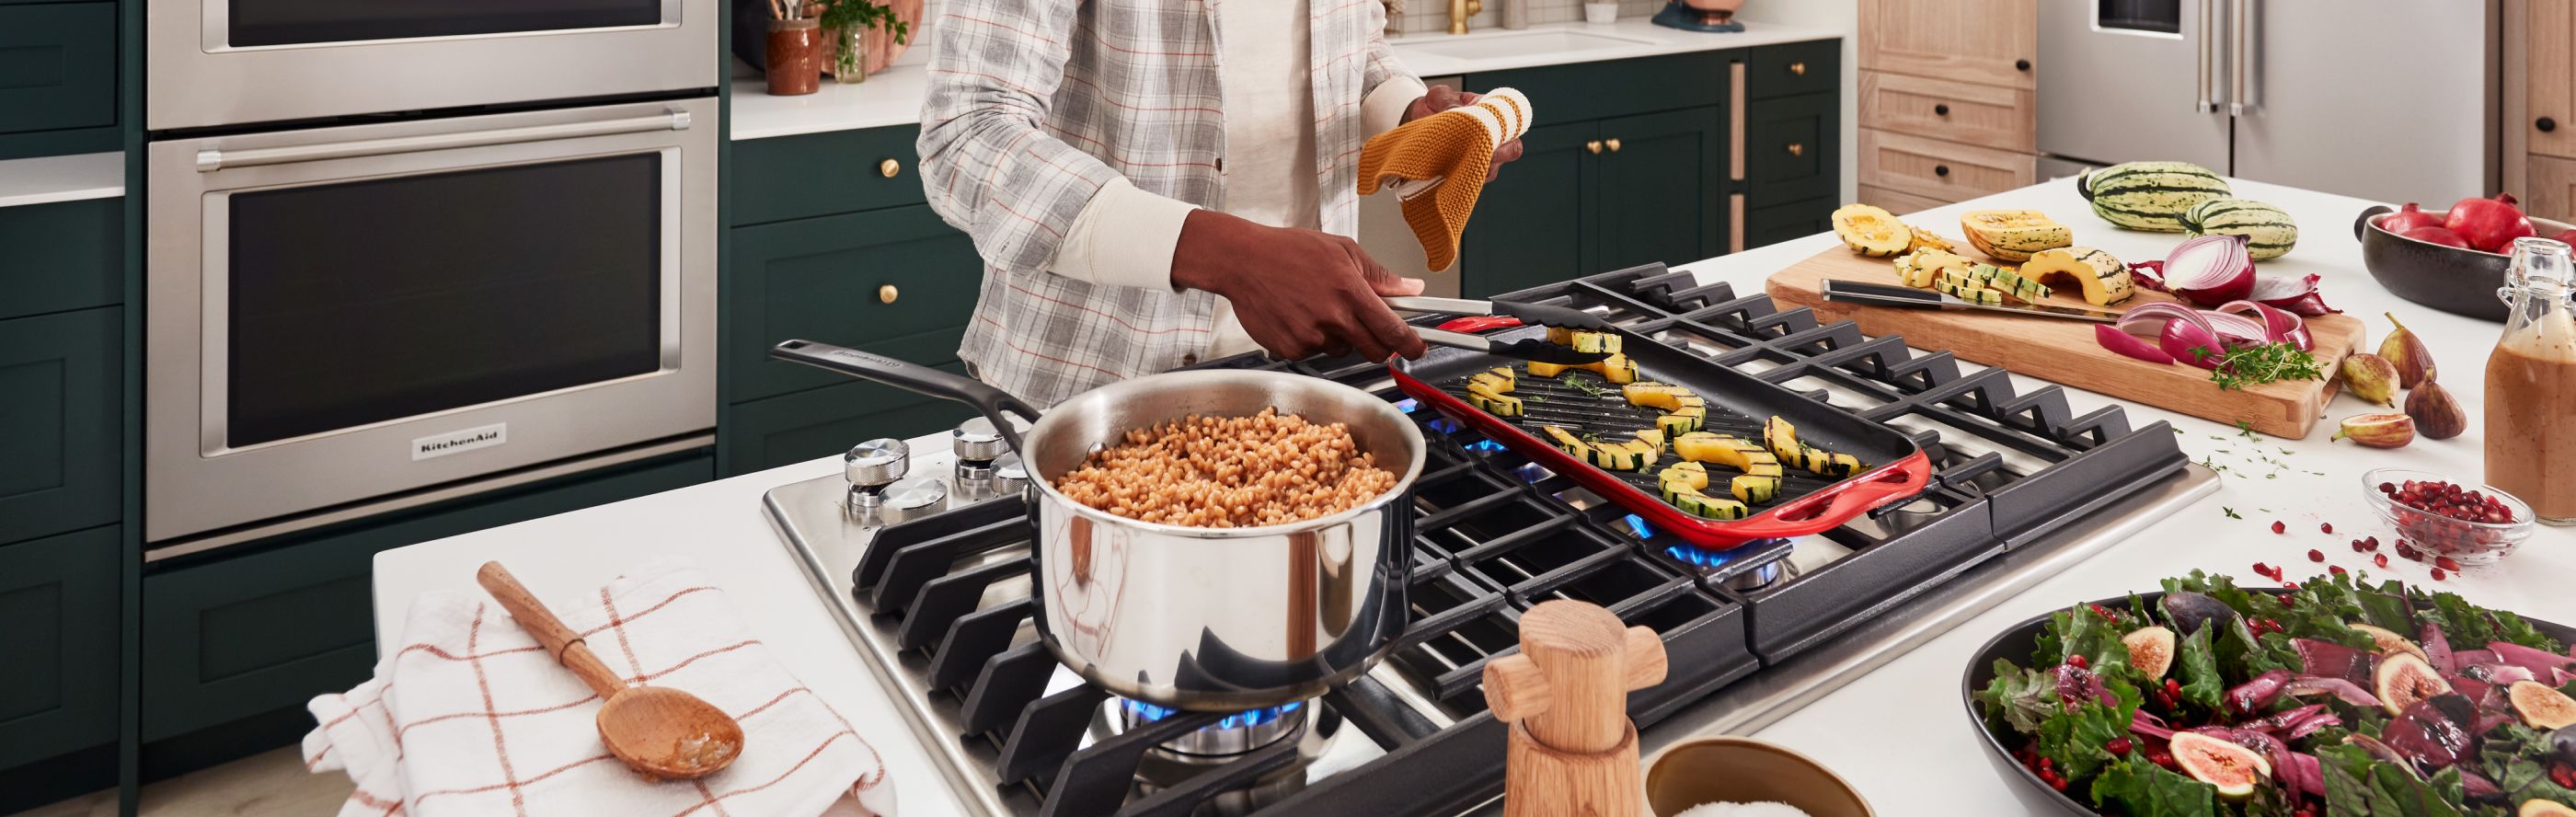 Person preparing food at a cooktop built into a kitchen island